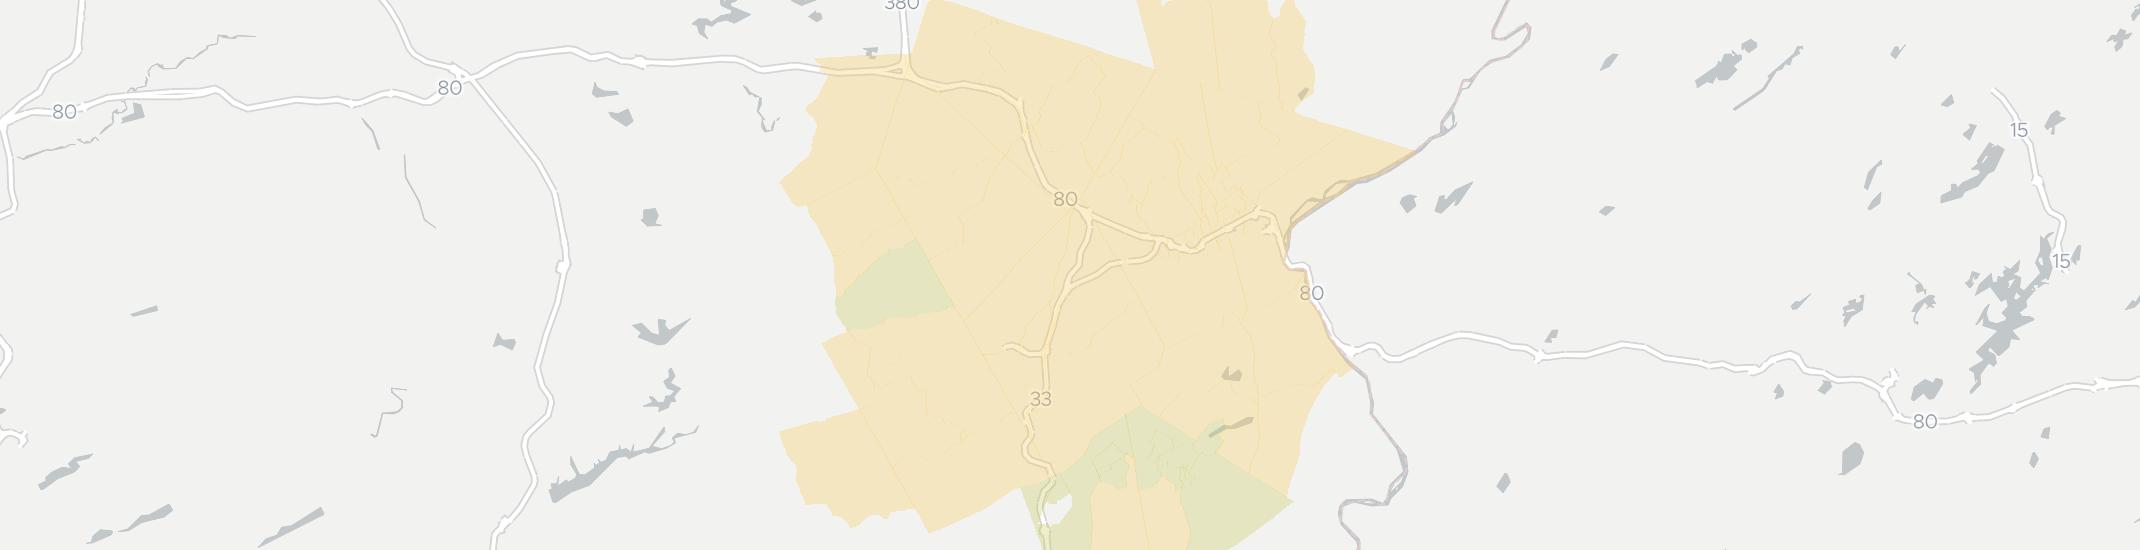 Stroudsburg Internet Competition Map. Click for interactive map.